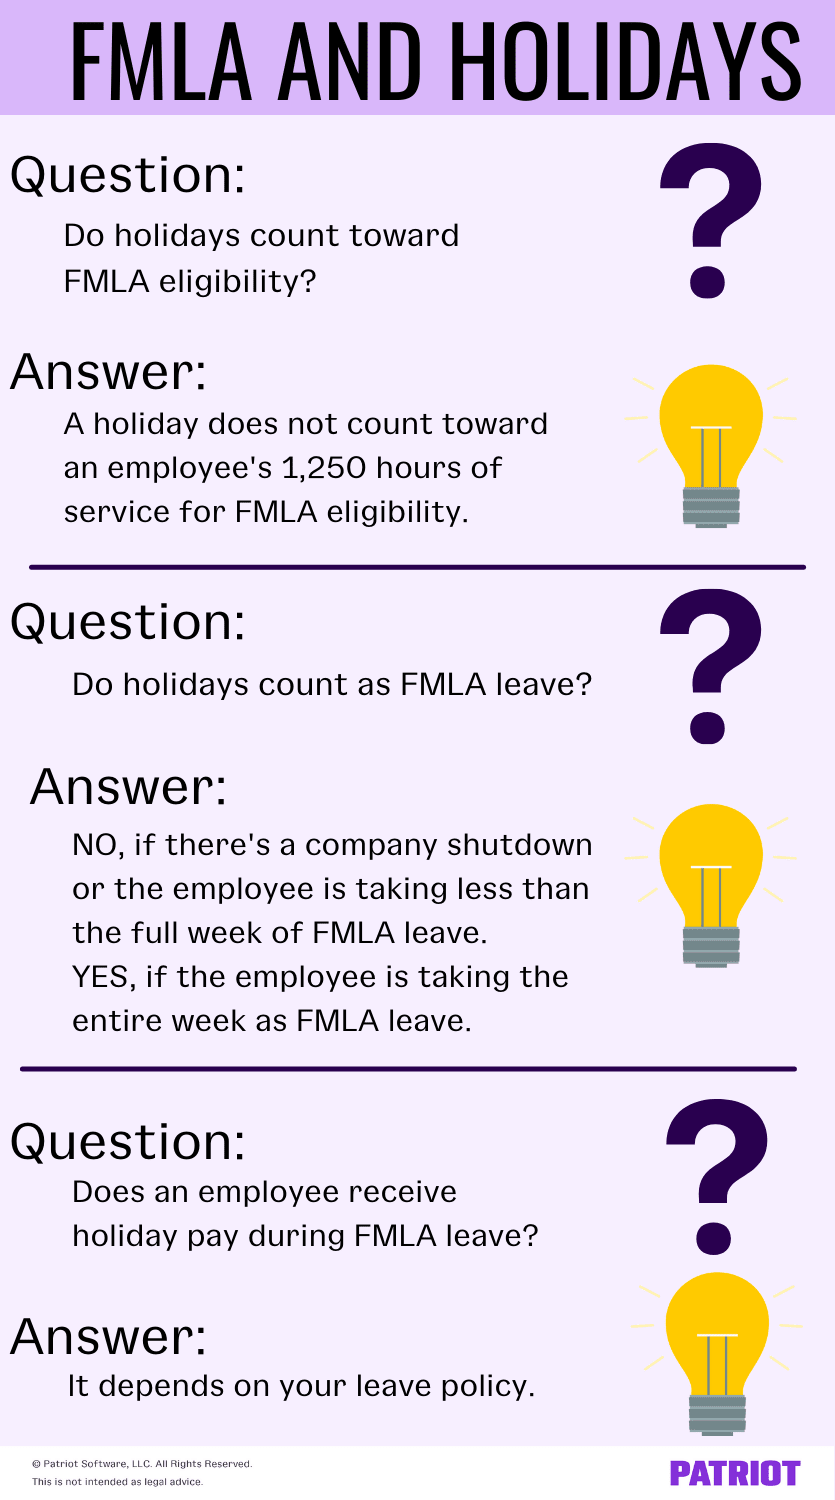 Infographic discussing commong questions and answers about FMLA and holidays 